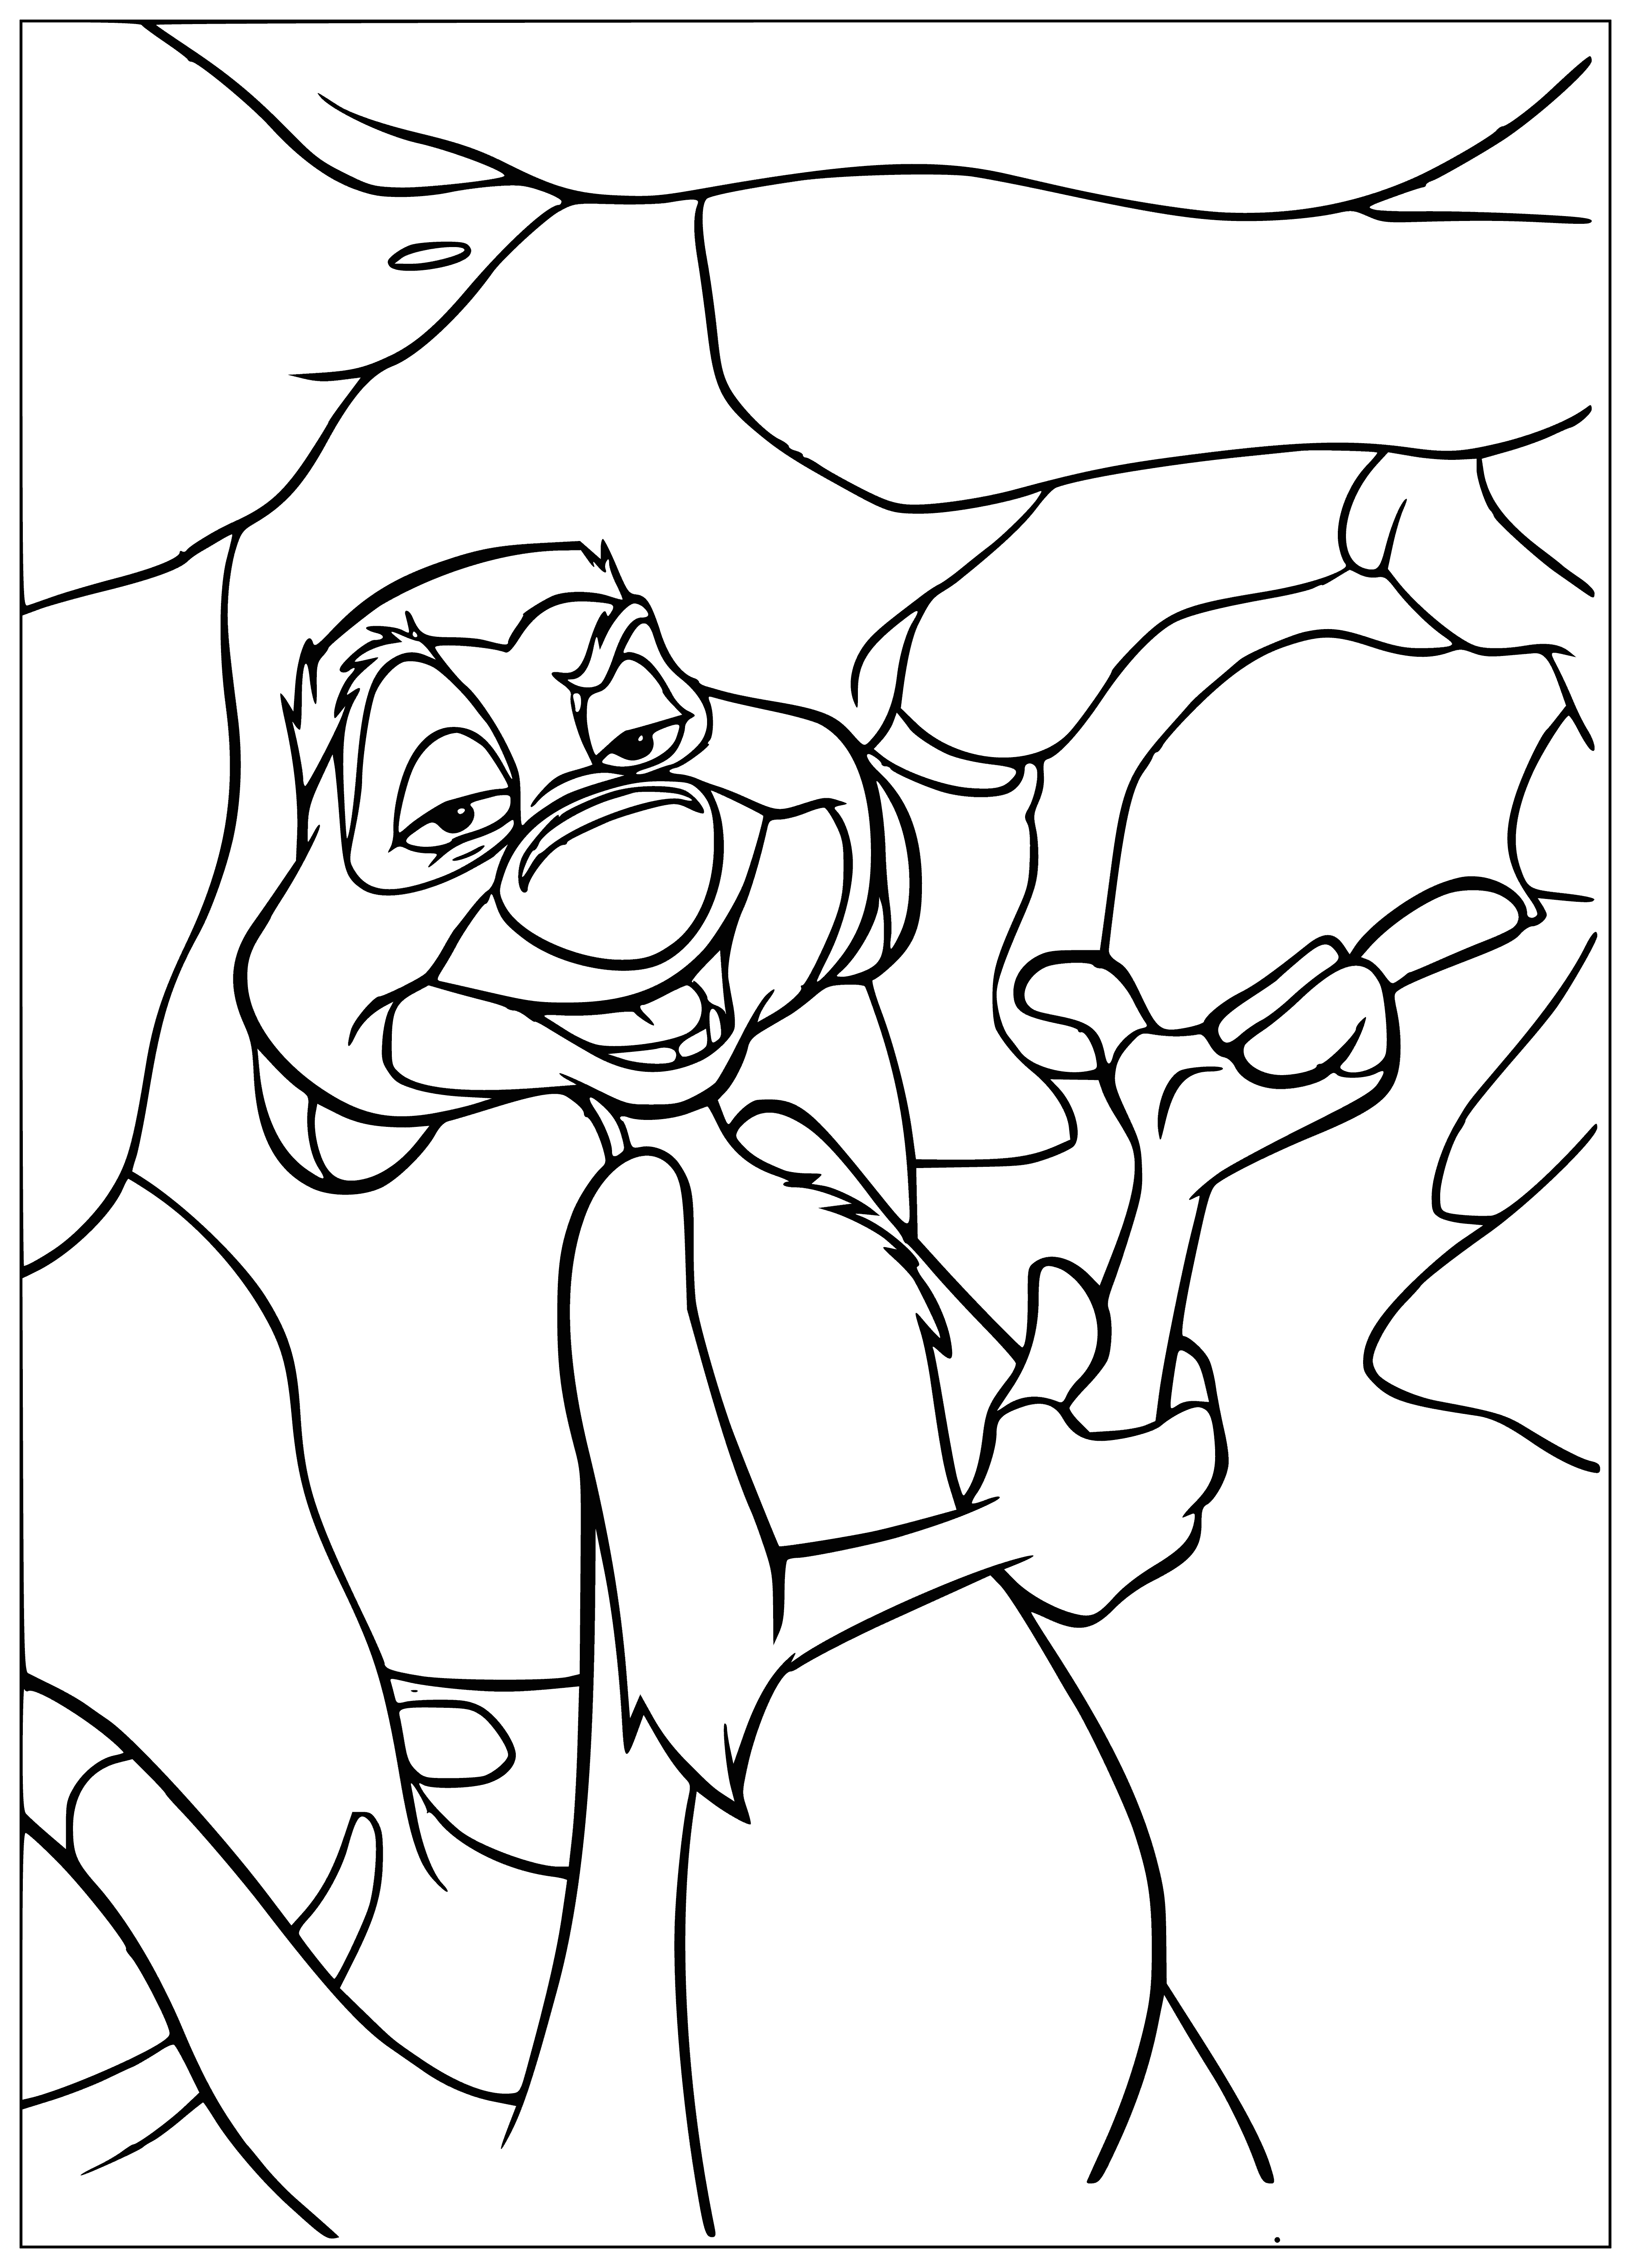 Uncle Timon coloring page